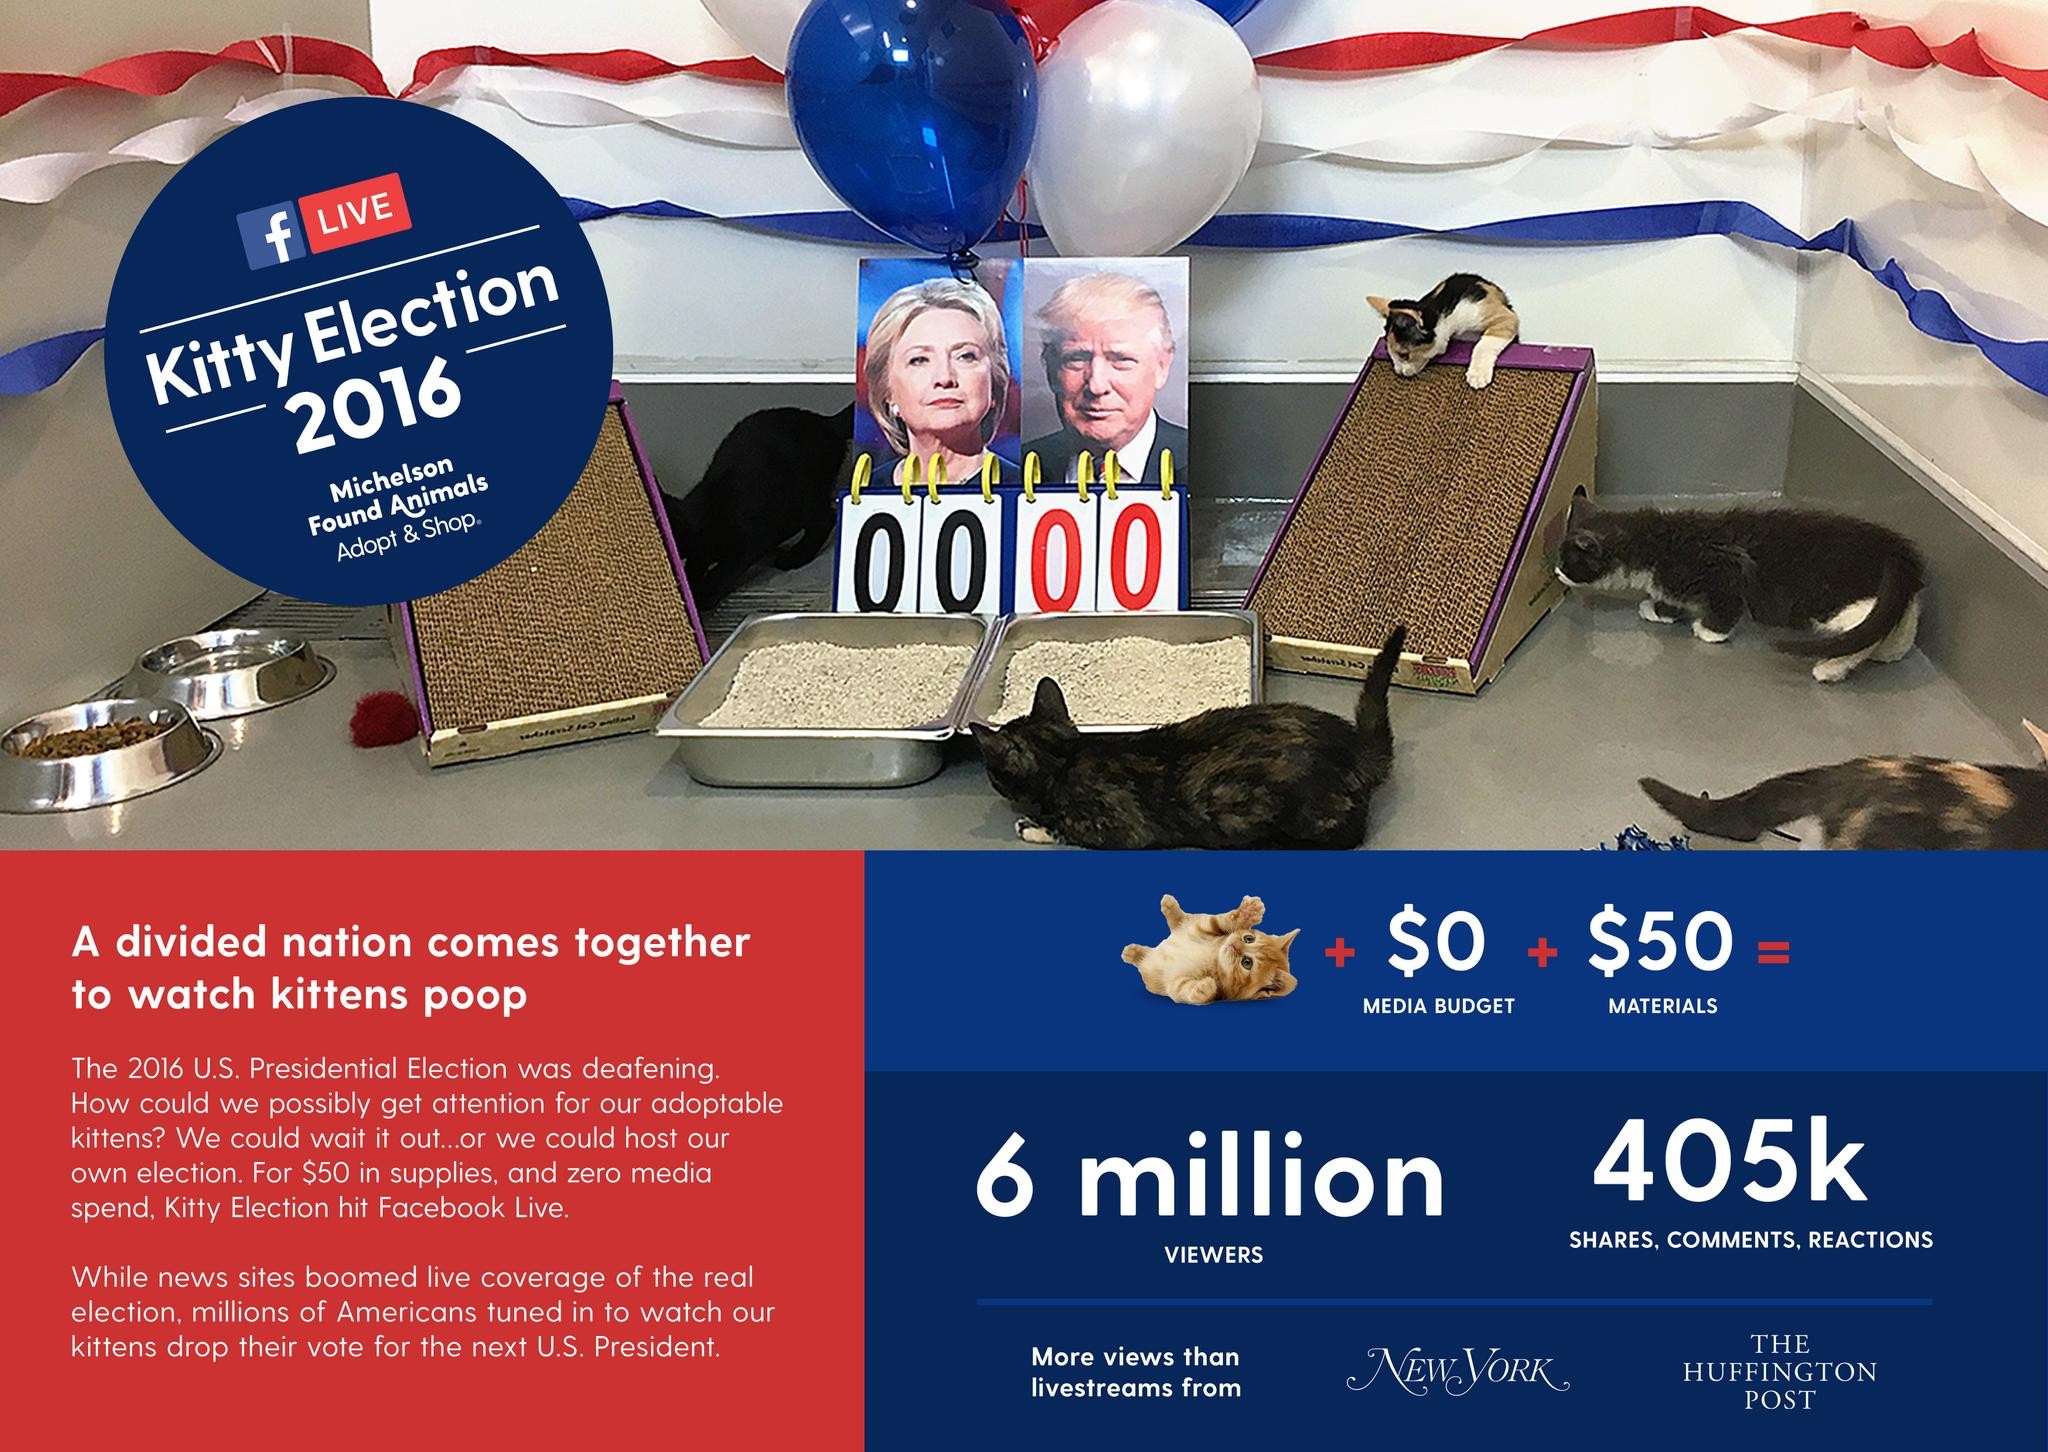 KITTY ELECTION